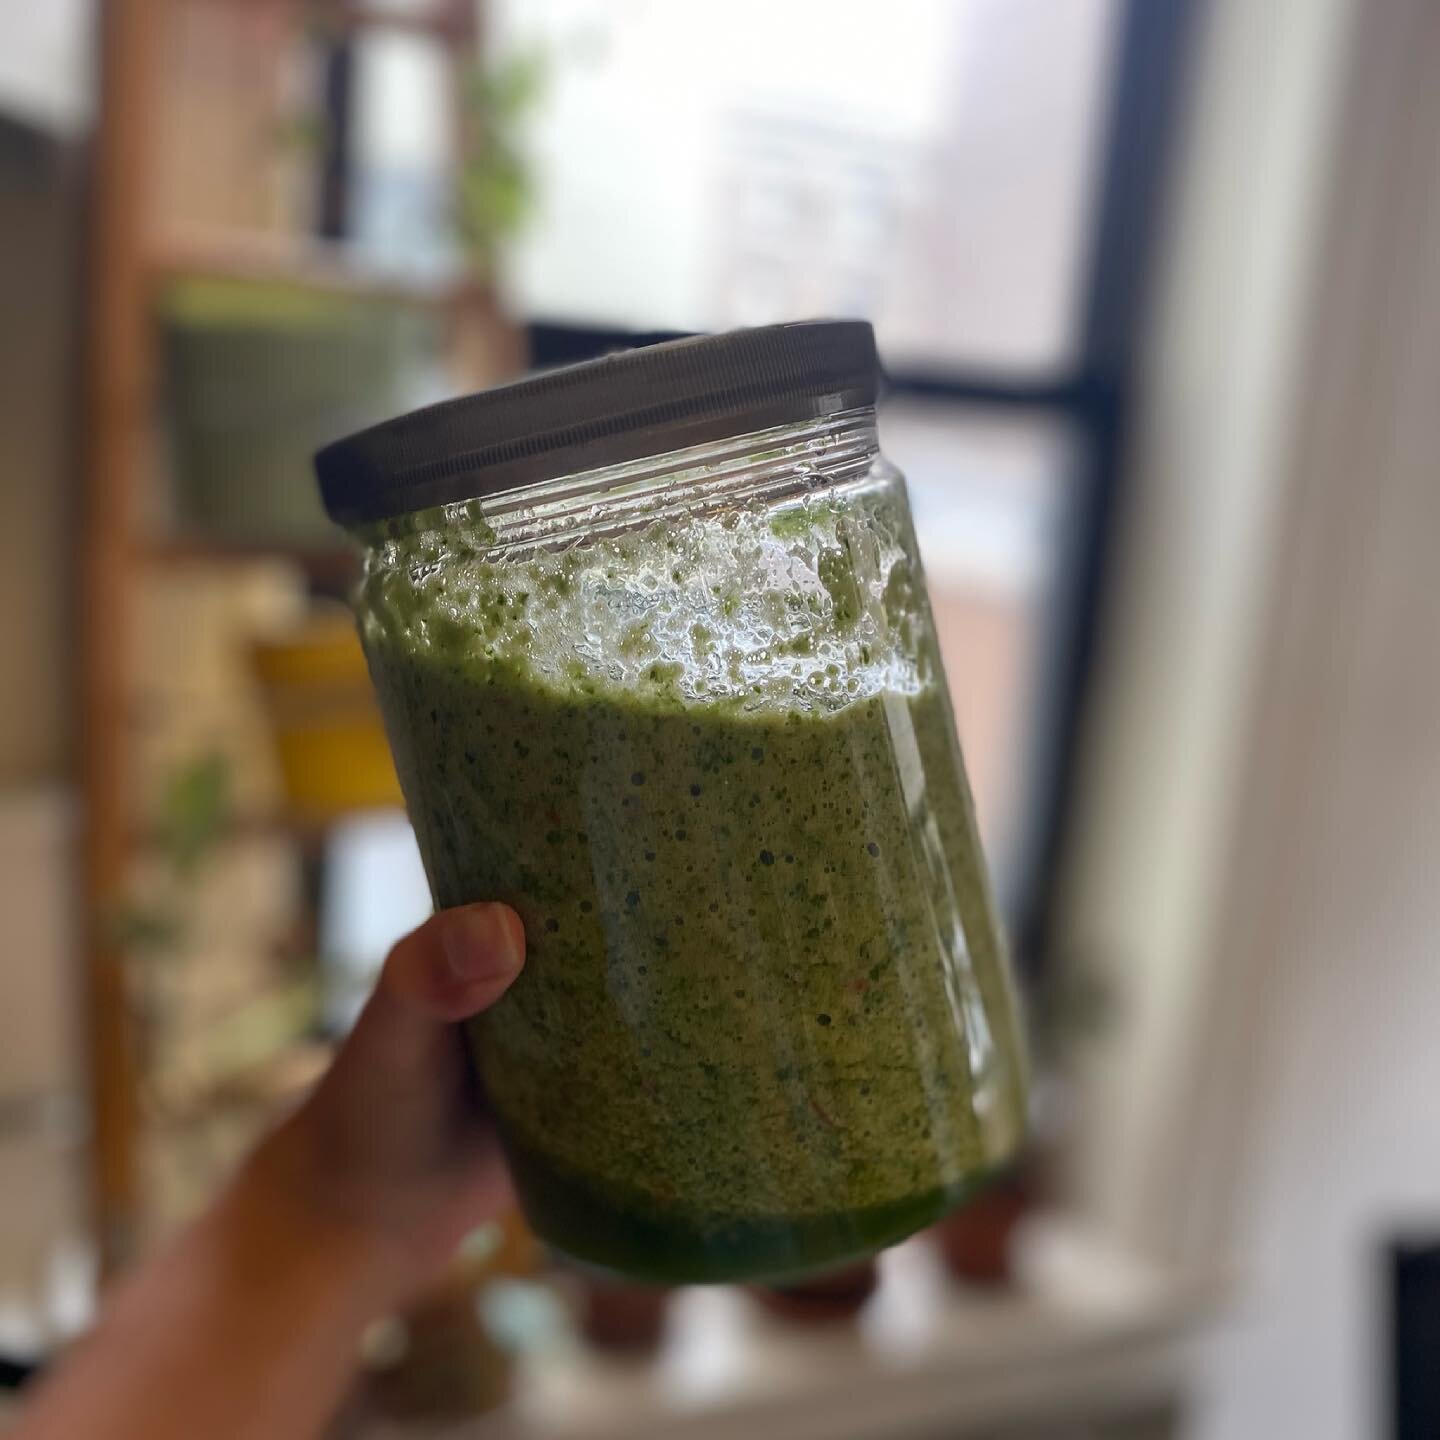 That time I spent a week in Astoria and had a ton of cilantro and culantro, along with other herbs and decided to make sofrito. Couldn&rsquo;t let it all go to waste. My sofrito Queen friend @happyhealthylatina was proud! 🙌🏽